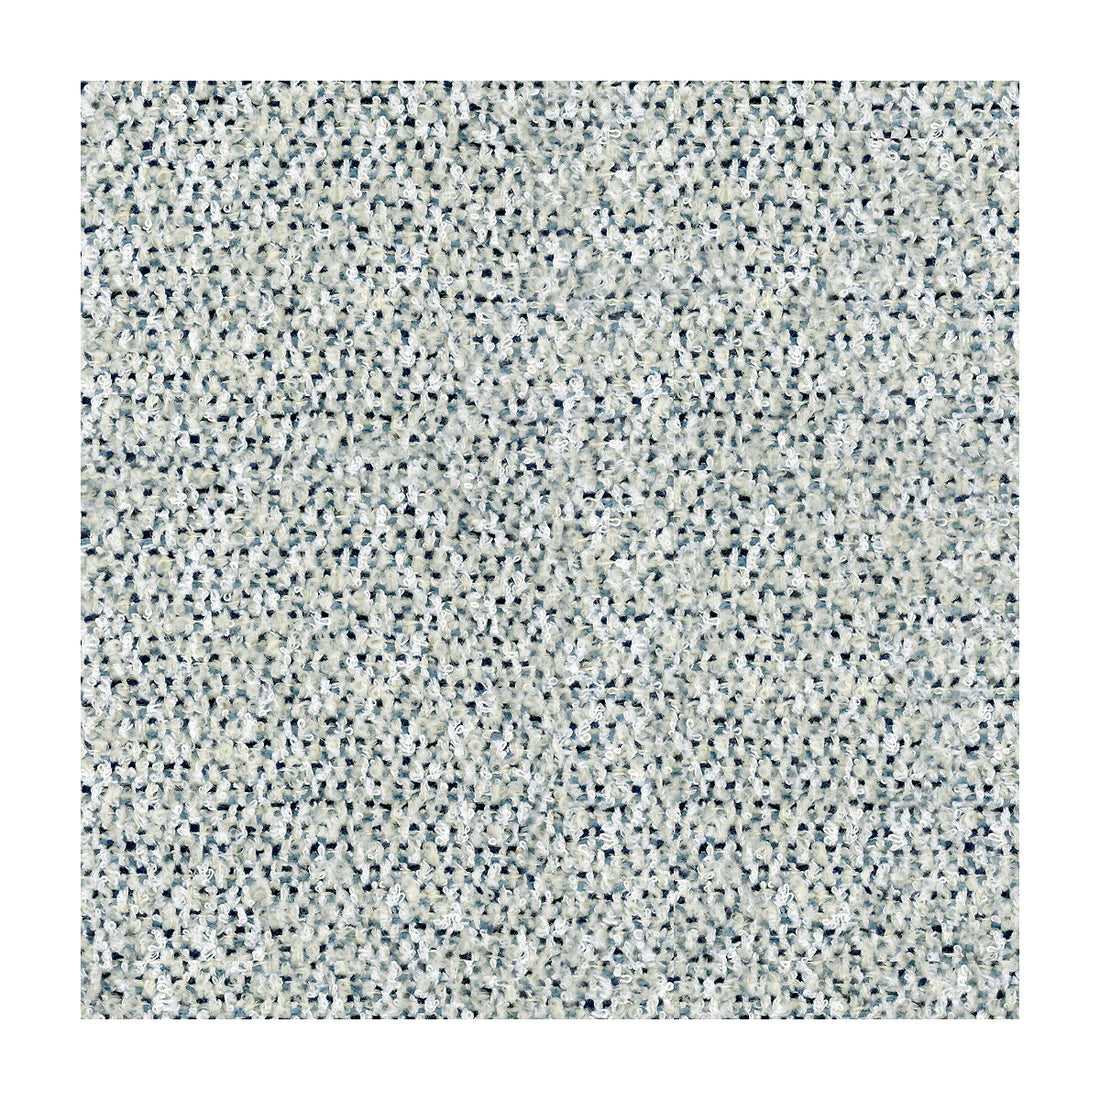 Tessellate fabric in ivory/blues color - pattern GWF-3527.155.0 - by Lee Jofa Modern in the Kelly Wearstler III collection